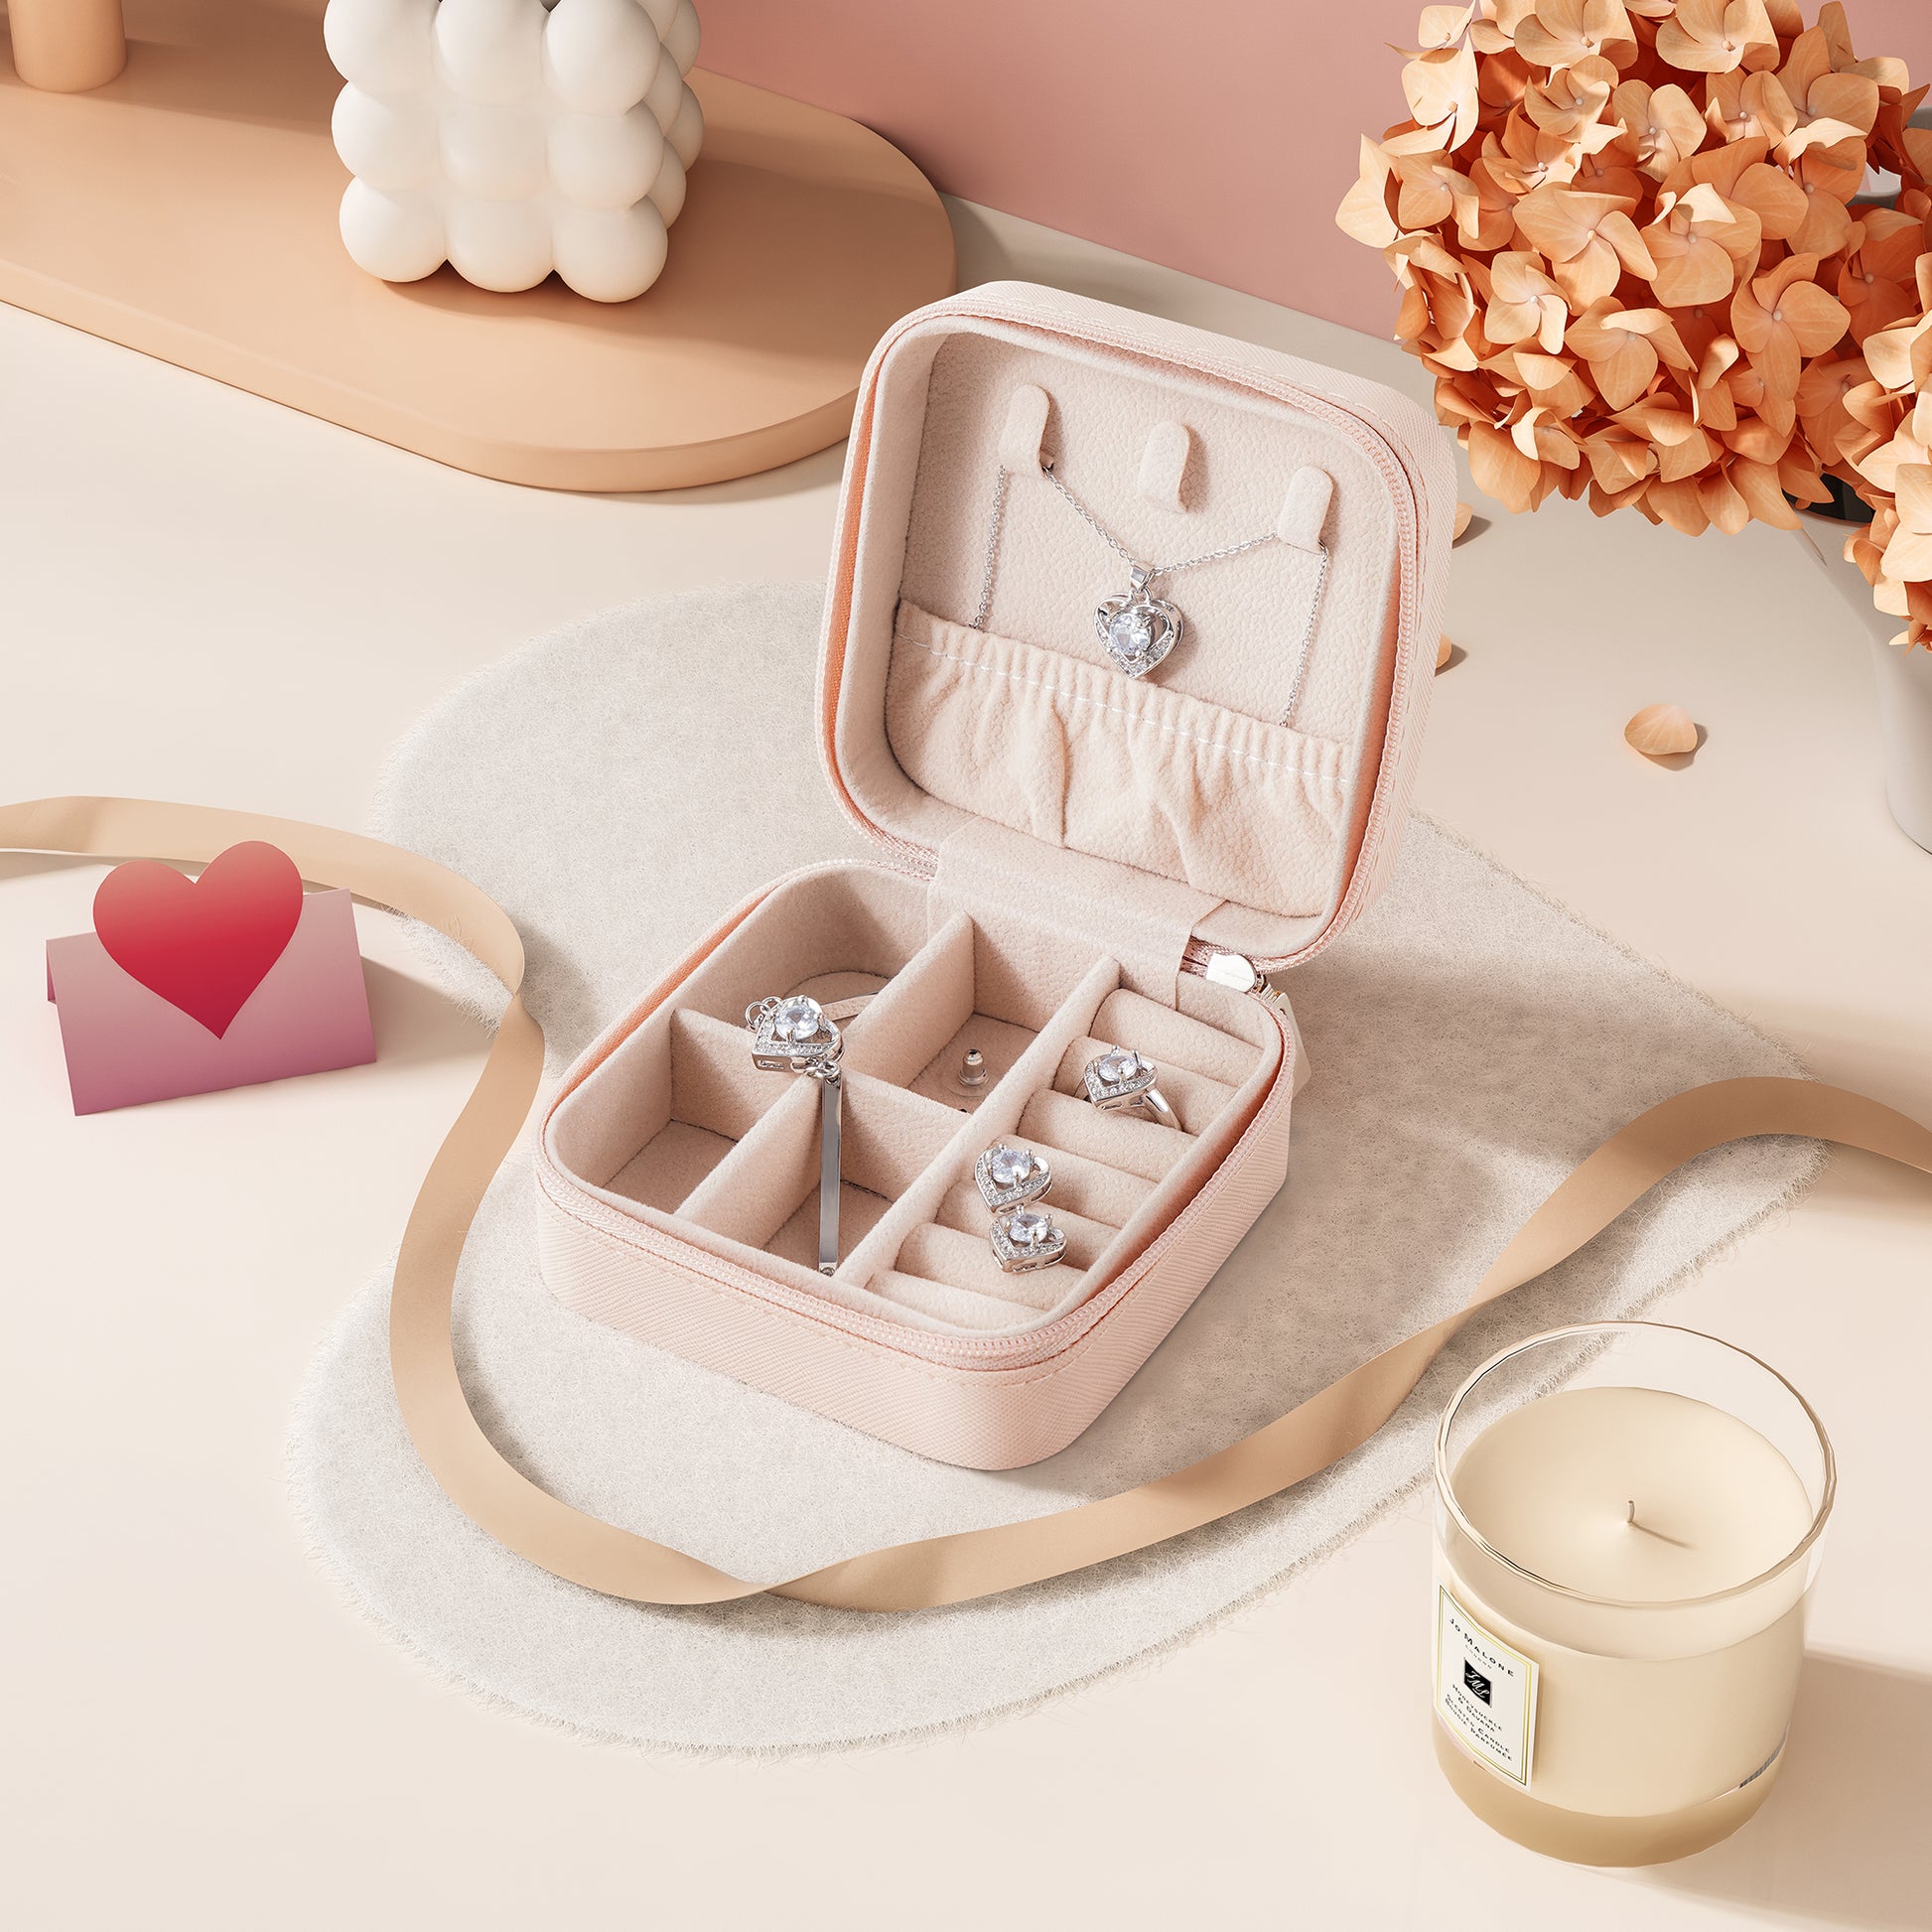 CASEGRACE Eternal Love Jewelry Gift Box for Valentine's Day – Casegrace